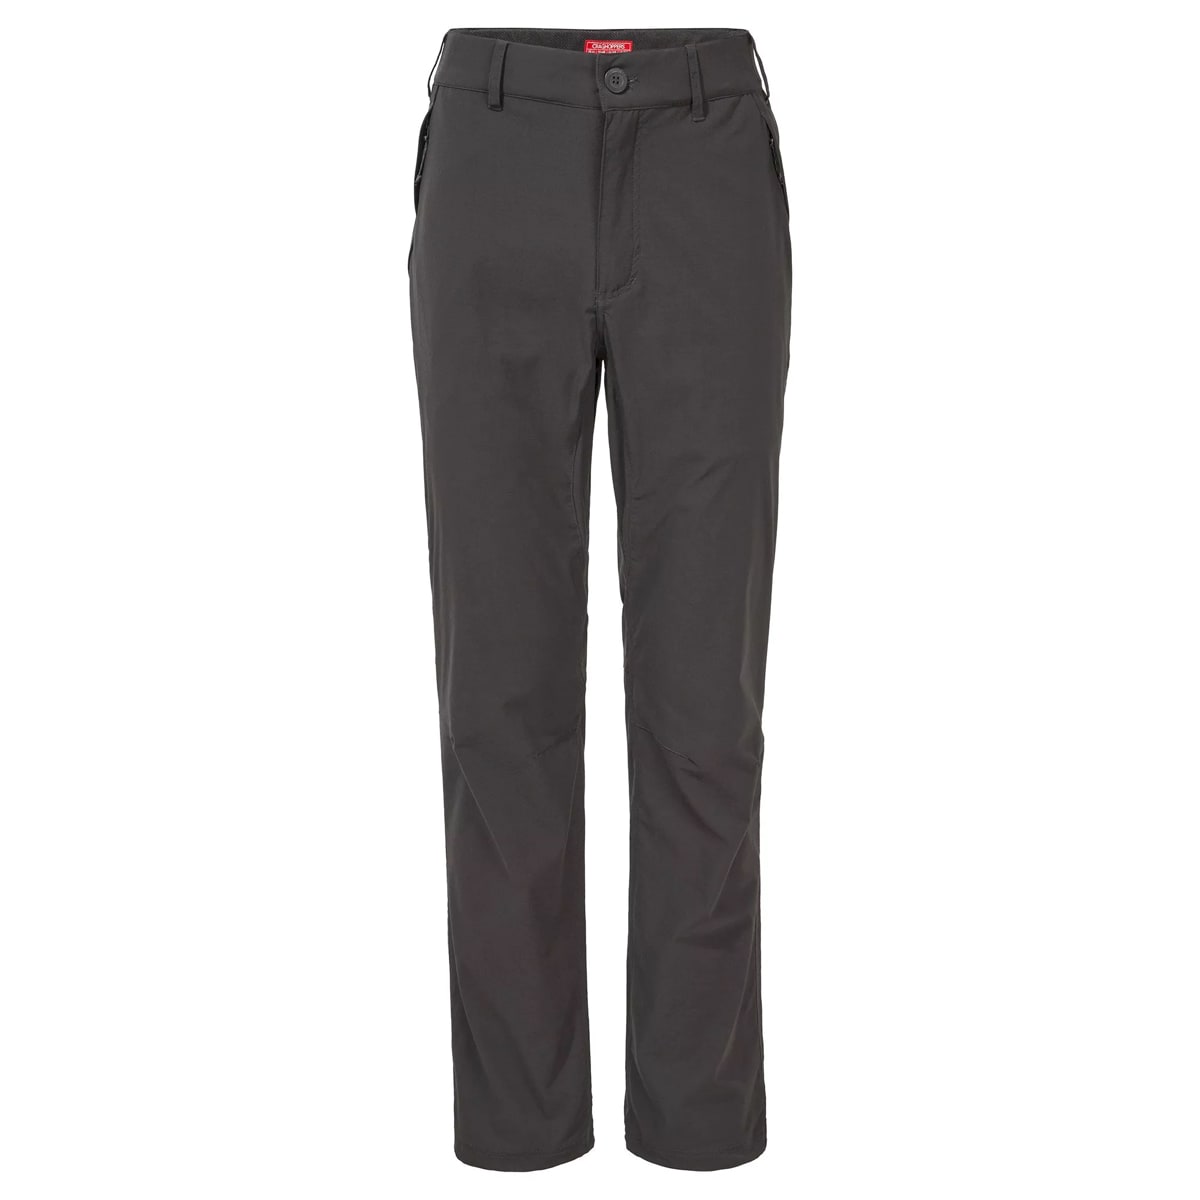 Craghoppers Nosilife Pro Trousers Black Pepper